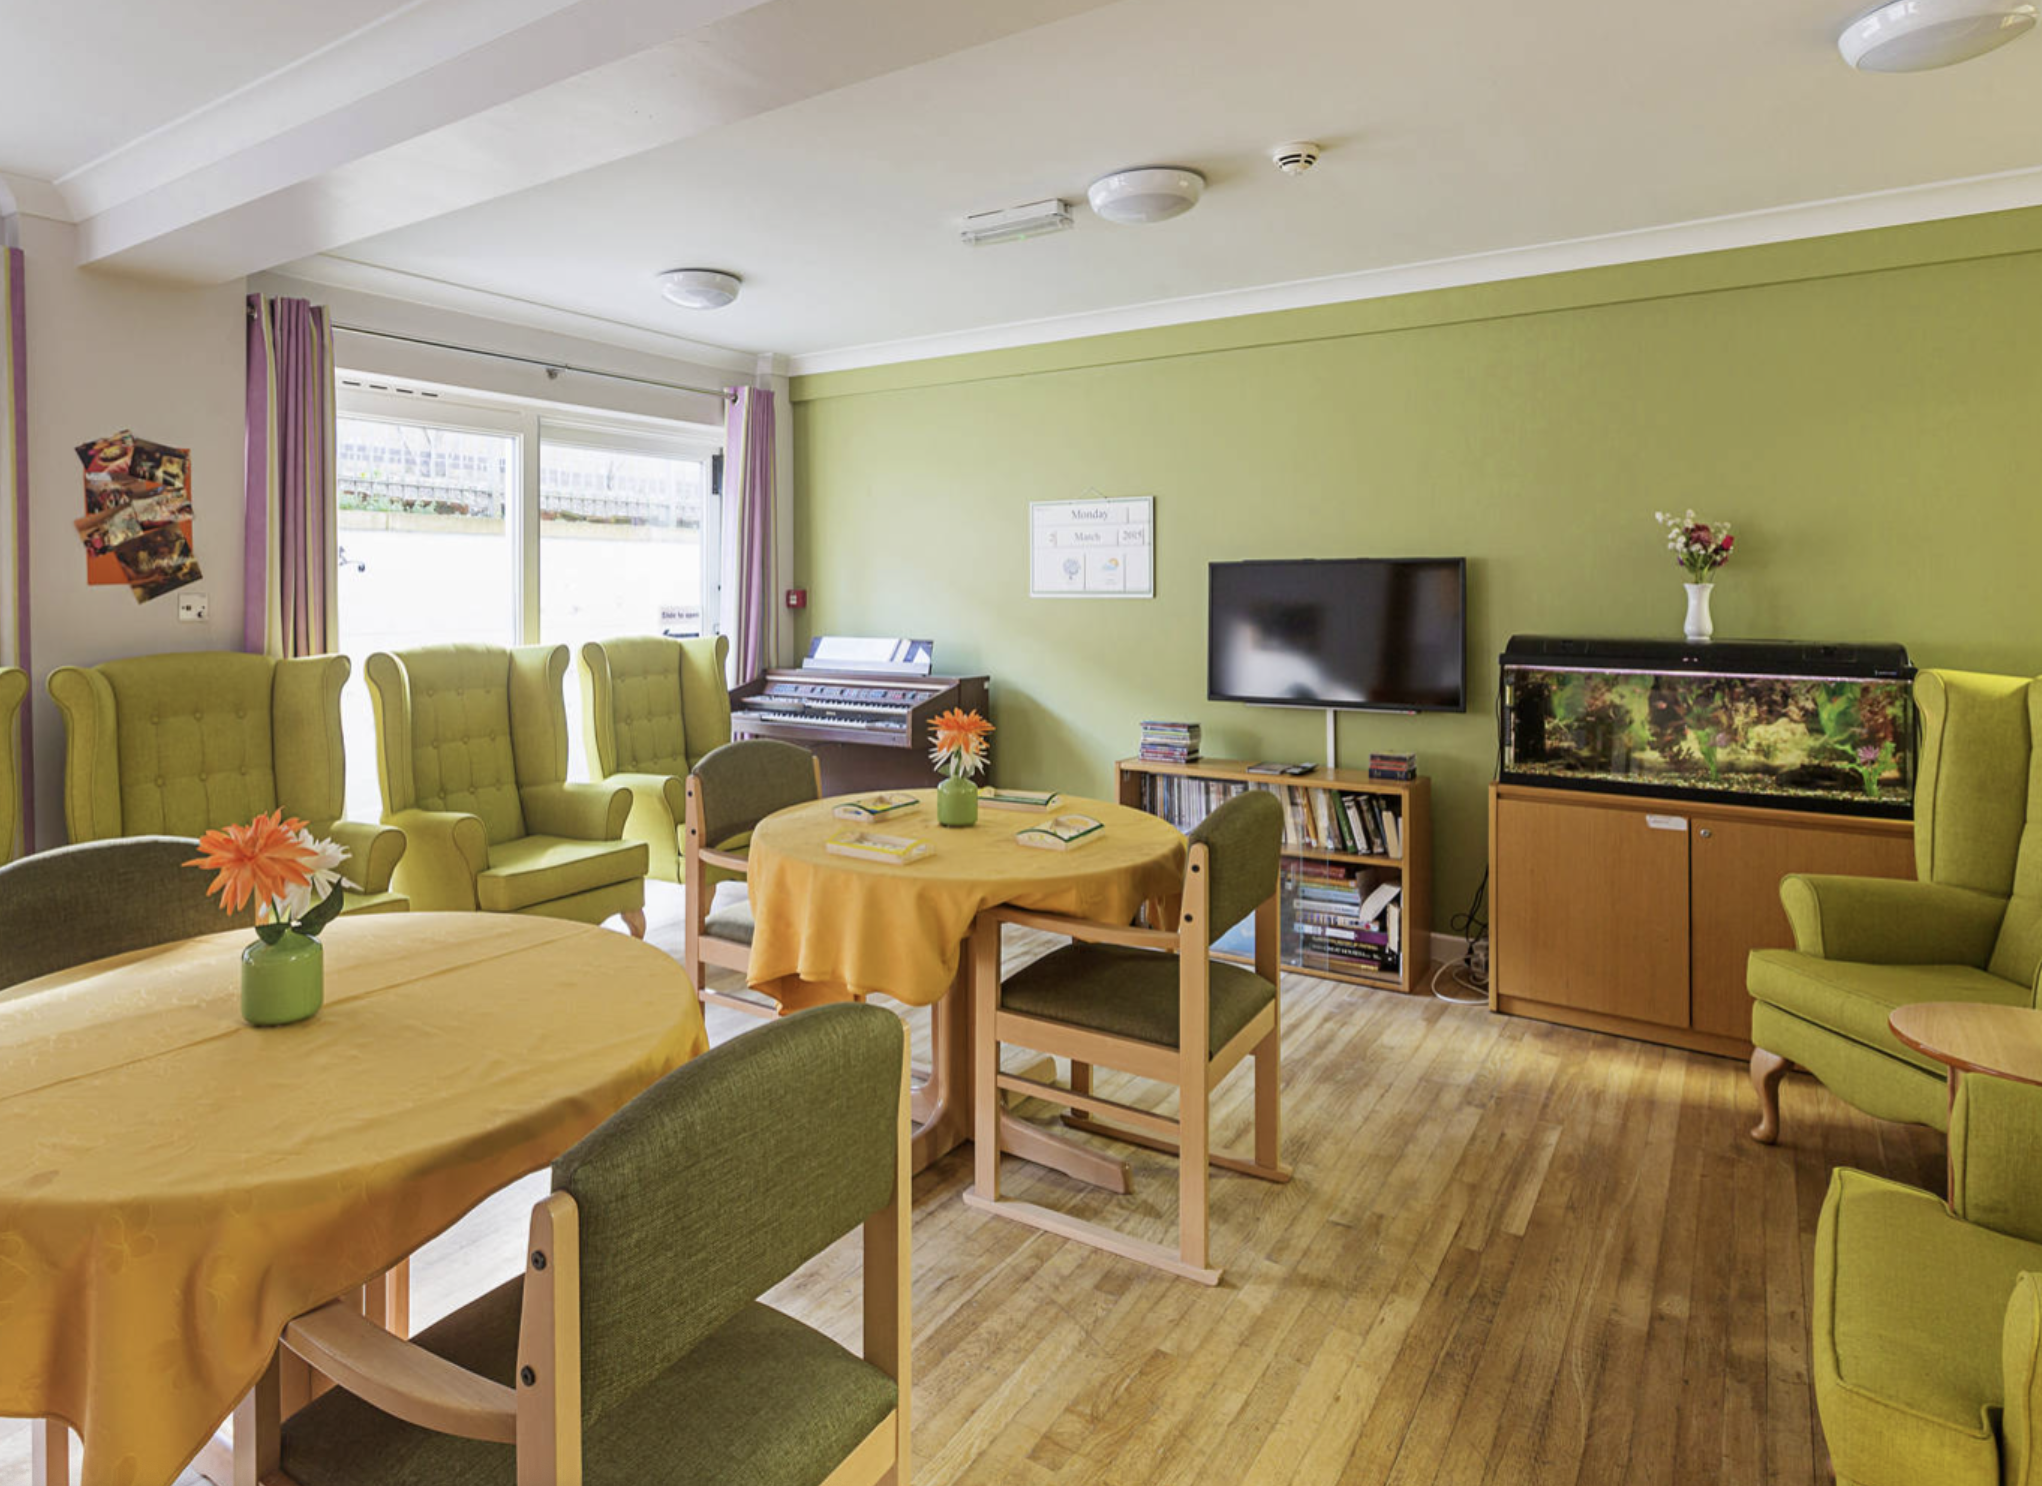 Dining room of Conewood Manor care home in  Bishop's Stortford, Hertfordshire